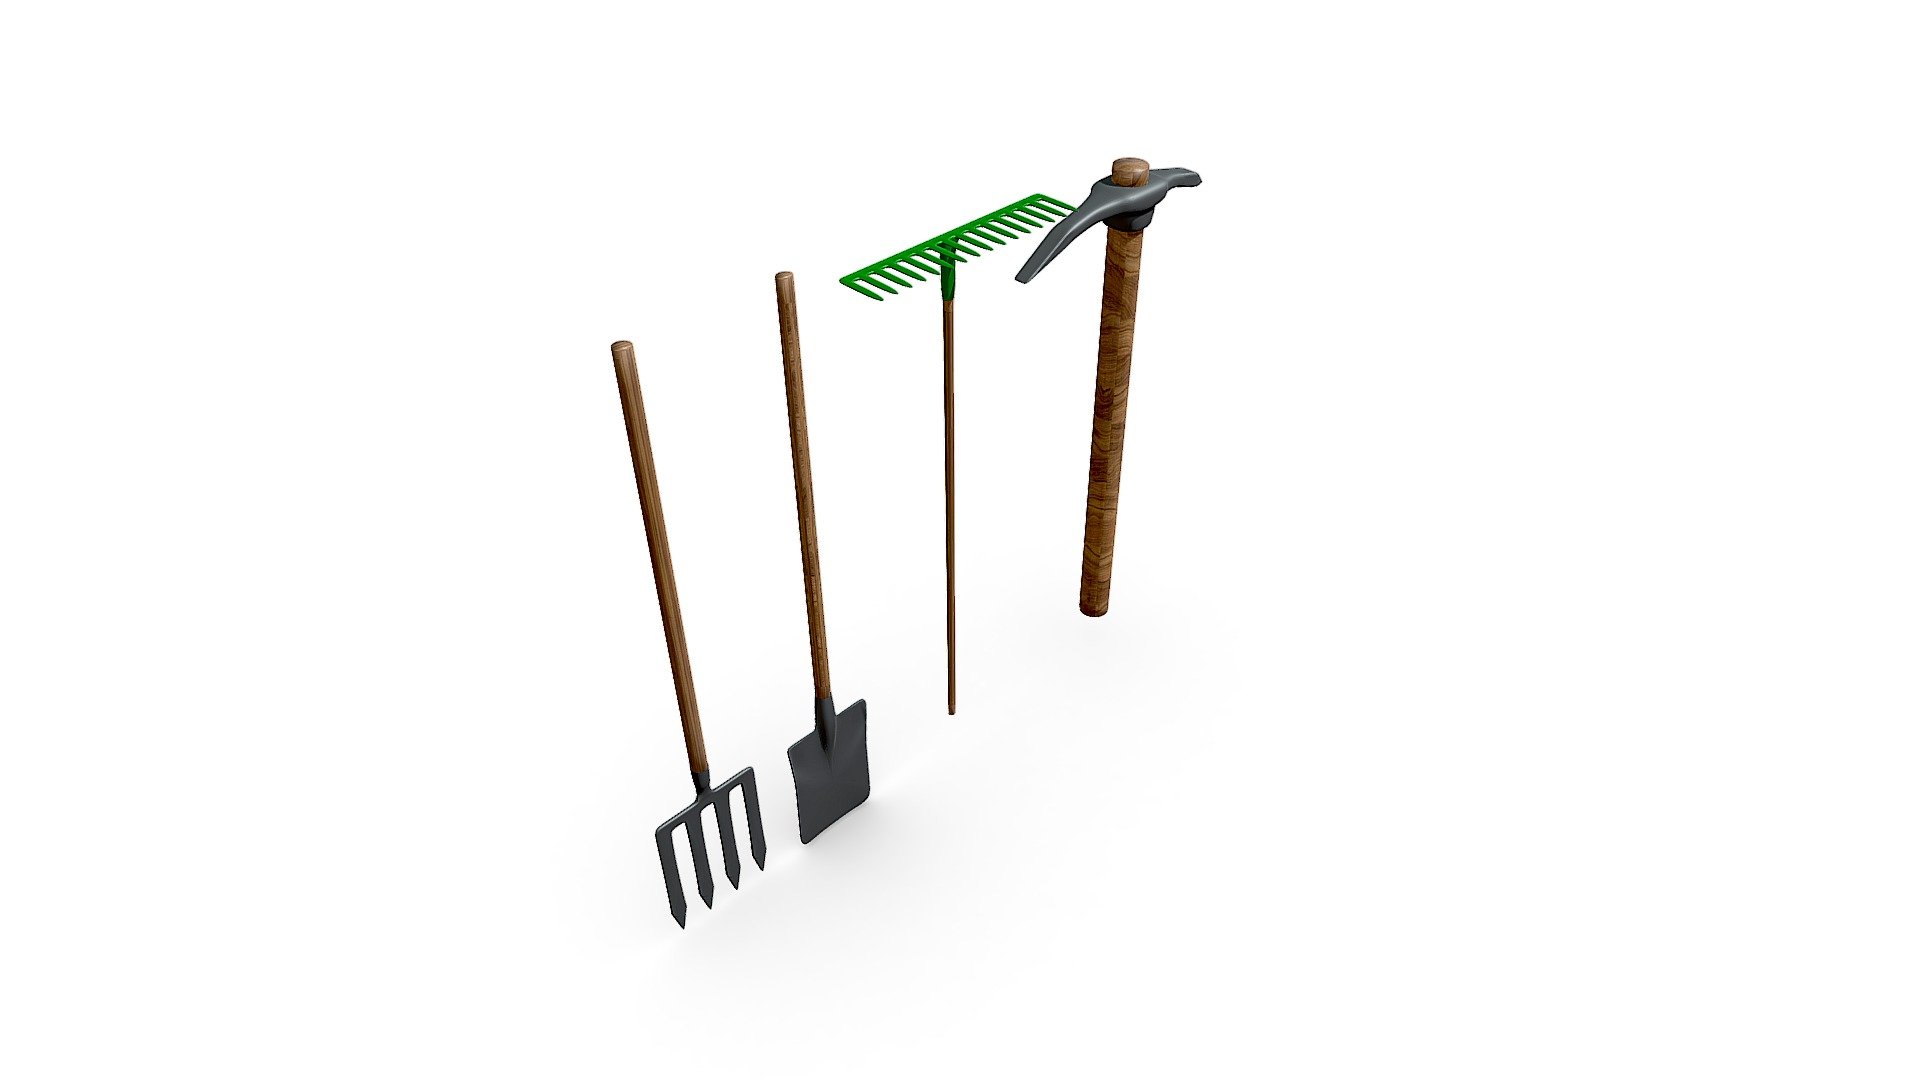 Set of Garden tools : 




A spade 

A fork

A pickaxe

A rake

This set will be improved with new tools 3d model